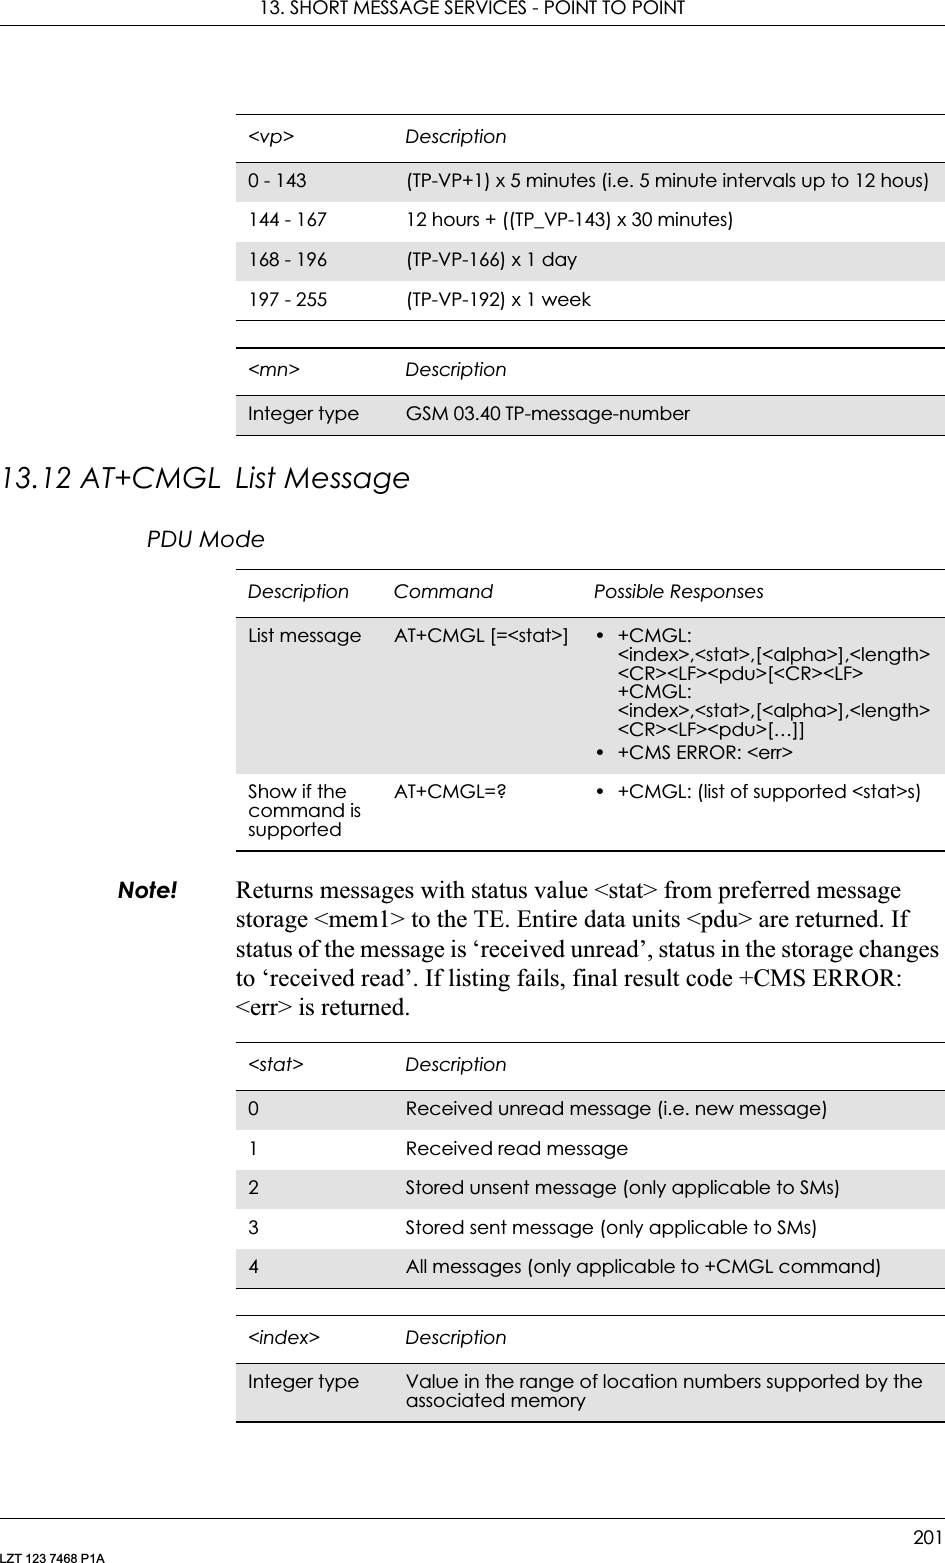 13. SHORT MESSAGE SERVICES - POINT TO POINT201LZT 123 7468 P1A13.12 AT+CMGL List MessagePDU ModeNote! Returns messages with status value &lt;stat&gt; from preferred message storage &lt;mem1&gt; to the TE. Entire data units &lt;pdu&gt; are returned. If status of the message is ‘received unread’, status in the storage changes to ‘received read’. If listing fails, final result code +CMS ERROR: &lt;err&gt; is returned.&lt;vp&gt; Description0 - 143 (TP-VP+1) x 5 minutes (i.e. 5 minute intervals up to 12 hous)144 - 167 12 hours + ((TP_VP-143) x 30 minutes)168 - 196 (TP-VP-166) x 1 day197 - 255 (TP-VP-192) x 1 week&lt;mn&gt; DescriptionInteger type GSM 03.40 TP-message-numberDescription Command Possible ResponsesList message  AT+CMGL [=&lt;stat&gt;] •+CMGL: &lt;index&gt;,&lt;stat&gt;,[&lt;alpha&gt;],&lt;length&gt;&lt;CR&gt;&lt;LF&gt;&lt;pdu&gt;[&lt;CR&gt;&lt;LF&gt;+CMGL:&lt;index&gt;,&lt;stat&gt;,[&lt;alpha&gt;],&lt;length&gt;&lt;CR&gt;&lt;LF&gt;&lt;pdu&gt;[…]]• +CMS ERROR: &lt;err&gt;Show if the command is supported AT+CMGL=? • +CMGL: (list of supported &lt;stat&gt;s)&lt;stat&gt; Description0Received unread message (i.e. new message)1 Received read message2Stored unsent message (only applicable to SMs)3 Stored sent message (only applicable to SMs)4All messages (only applicable to +CMGL command)&lt;index&gt; DescriptionInteger type Value in the range of location numbers supported by the associated memory